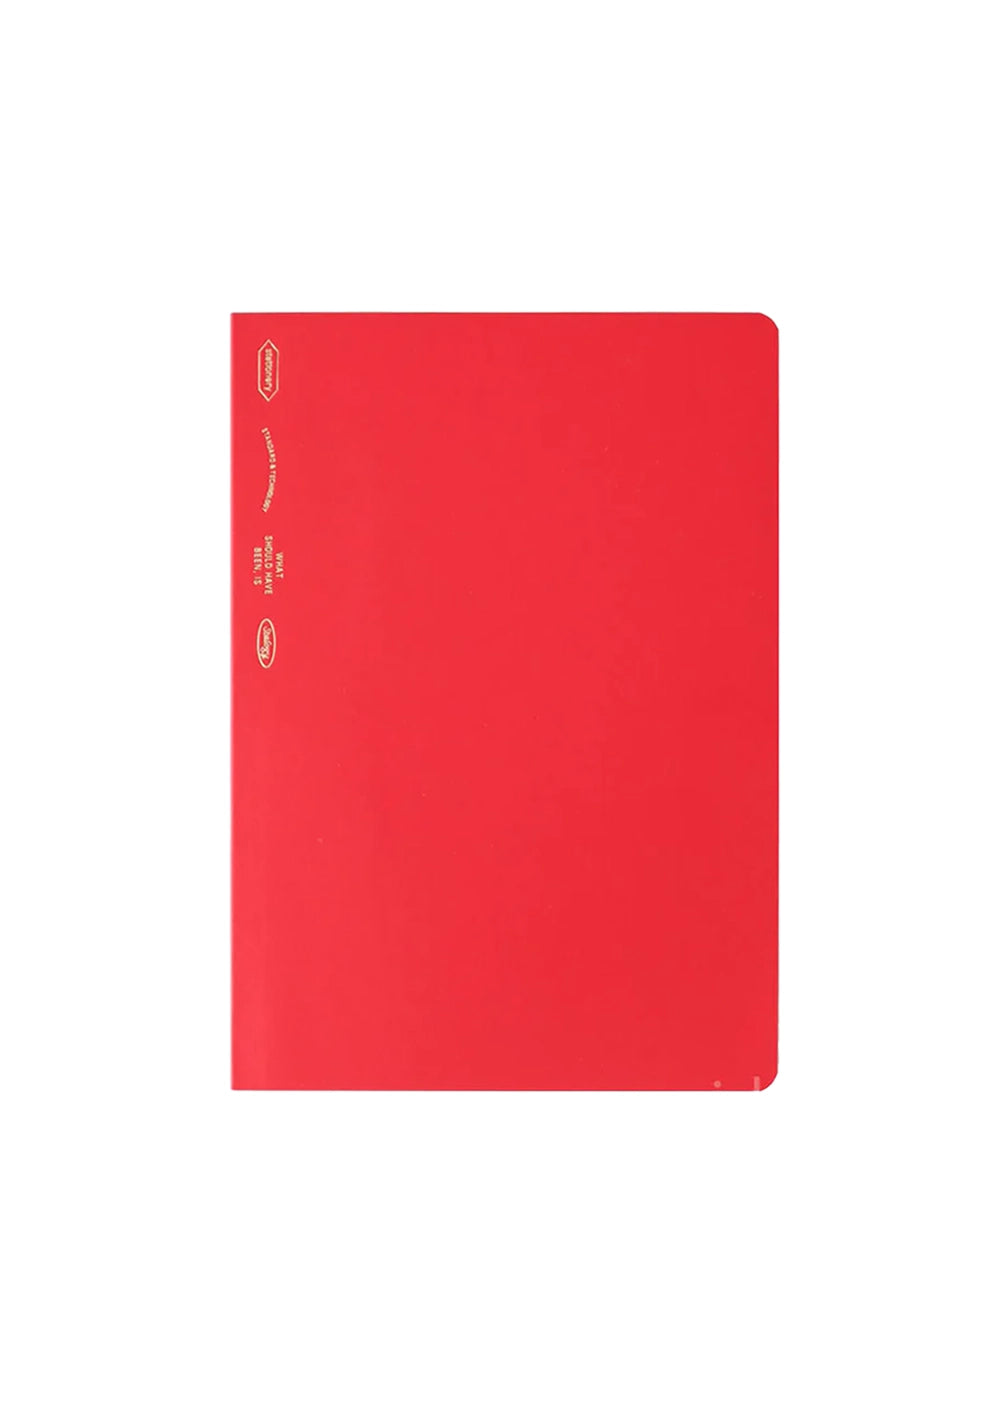 Half Year A5 Notebook - Red